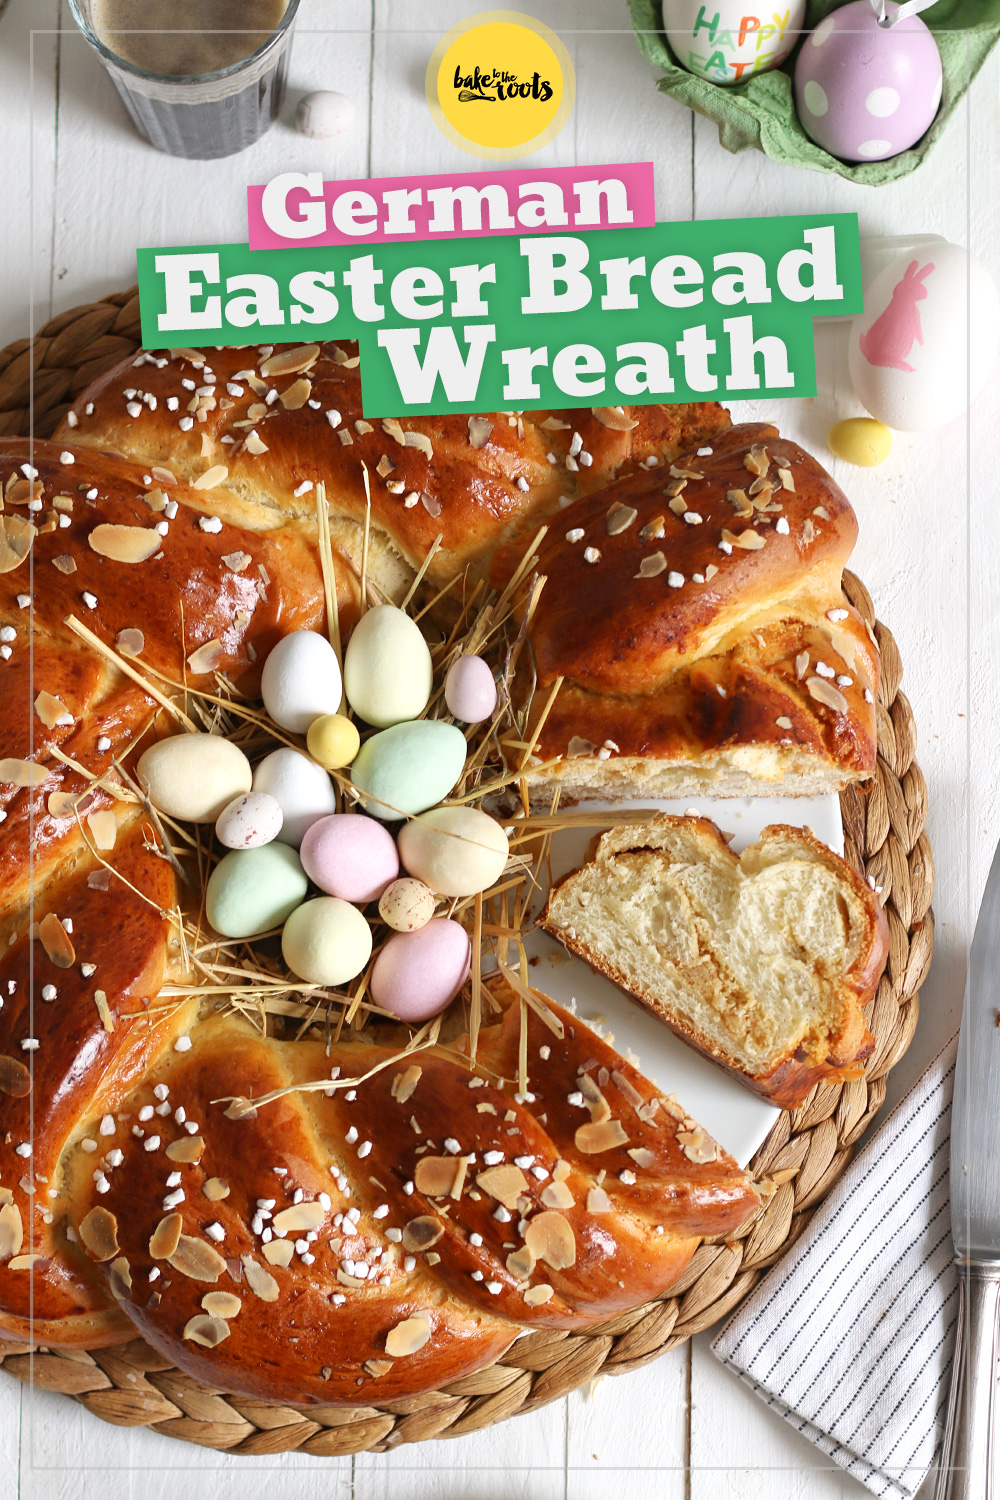 Traditional German Easter Bread Wreath with Marzipan | Bake to the roots